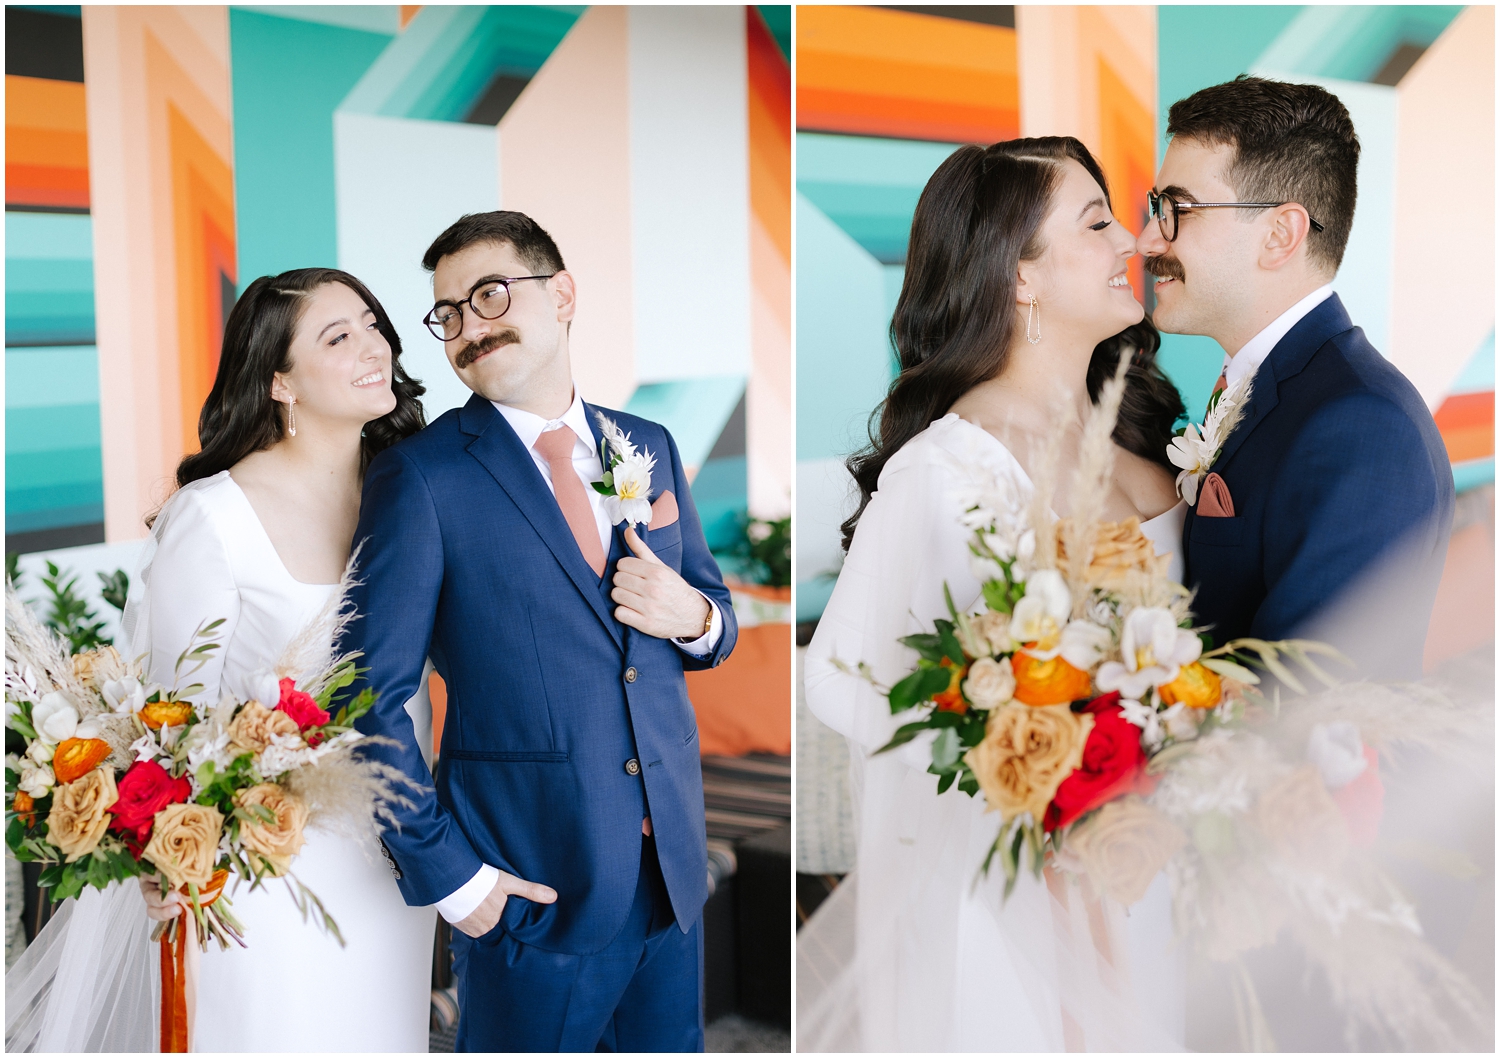 Couple stands in front of a colorful wall on their wedding day in Tampa, FL